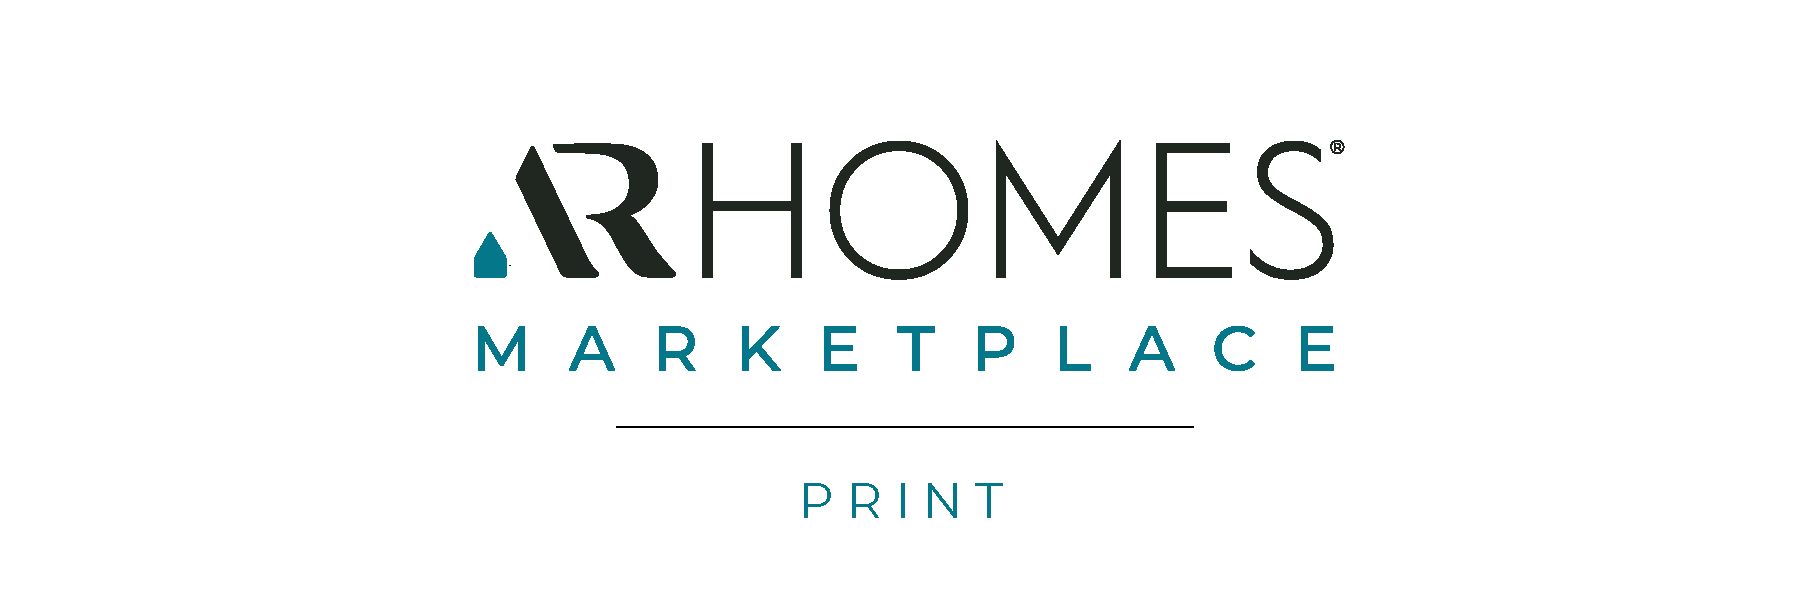 Welcome to the AR Homes Marketplace